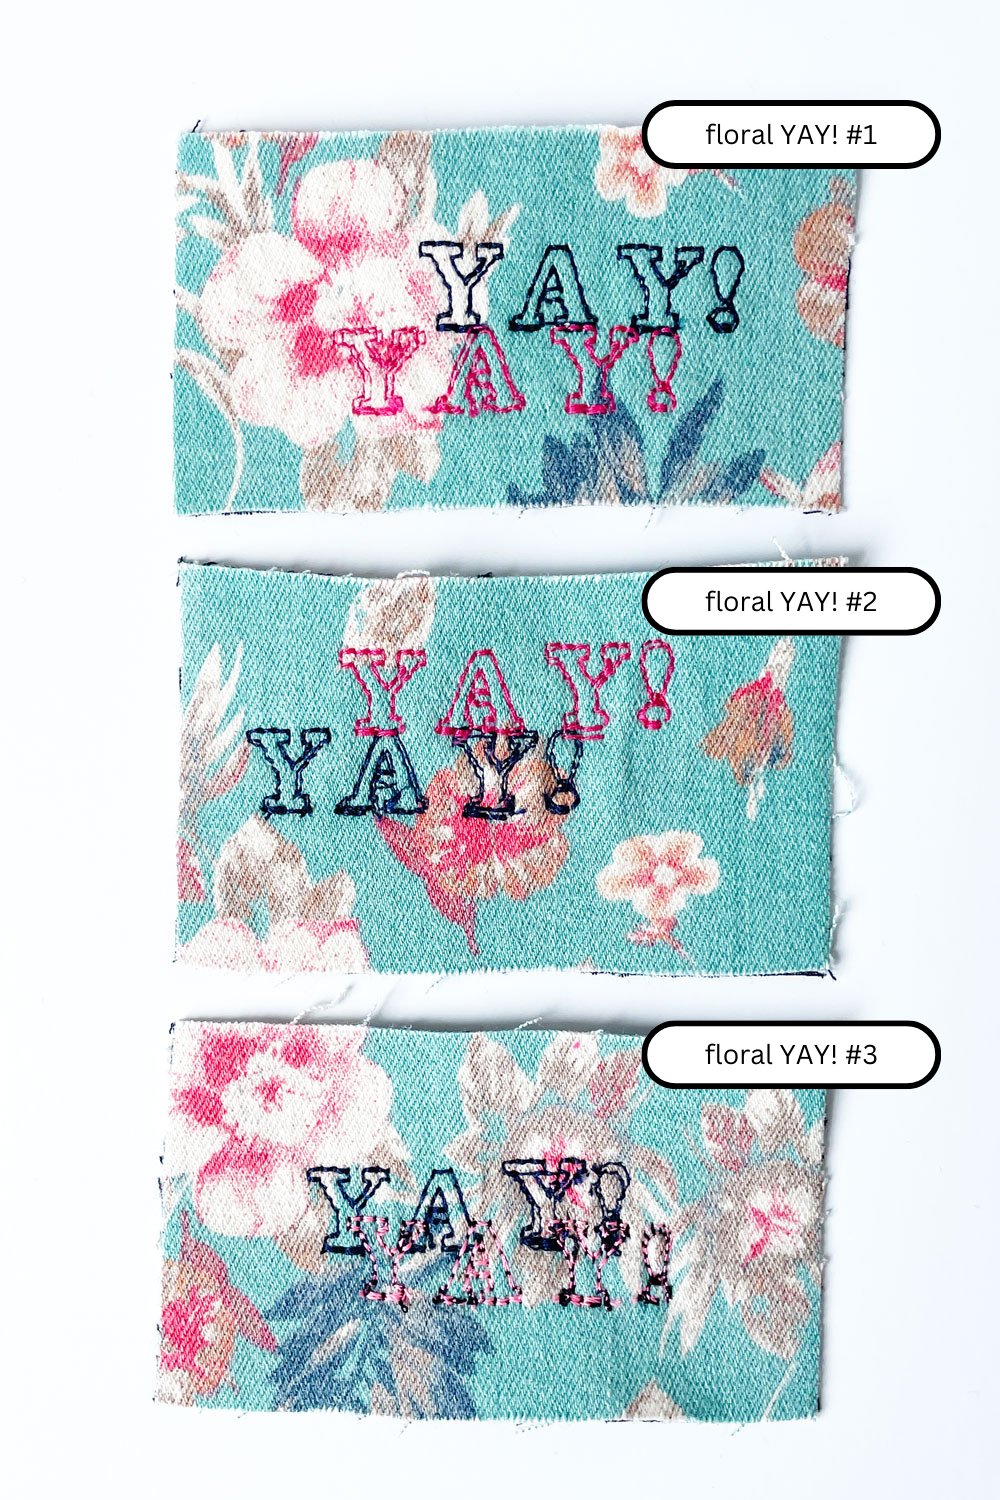 3 sew-on patches in teal floral denim with embroidered YAY! 2 times in the middle. Top: floral YAY! #1: navy YAY!, dark pink YAY! Middle: floral YAY! #2: dark pink YAY!, navy blue YAY! Floral YAY #3: navy blue YAY! light pink YAY!